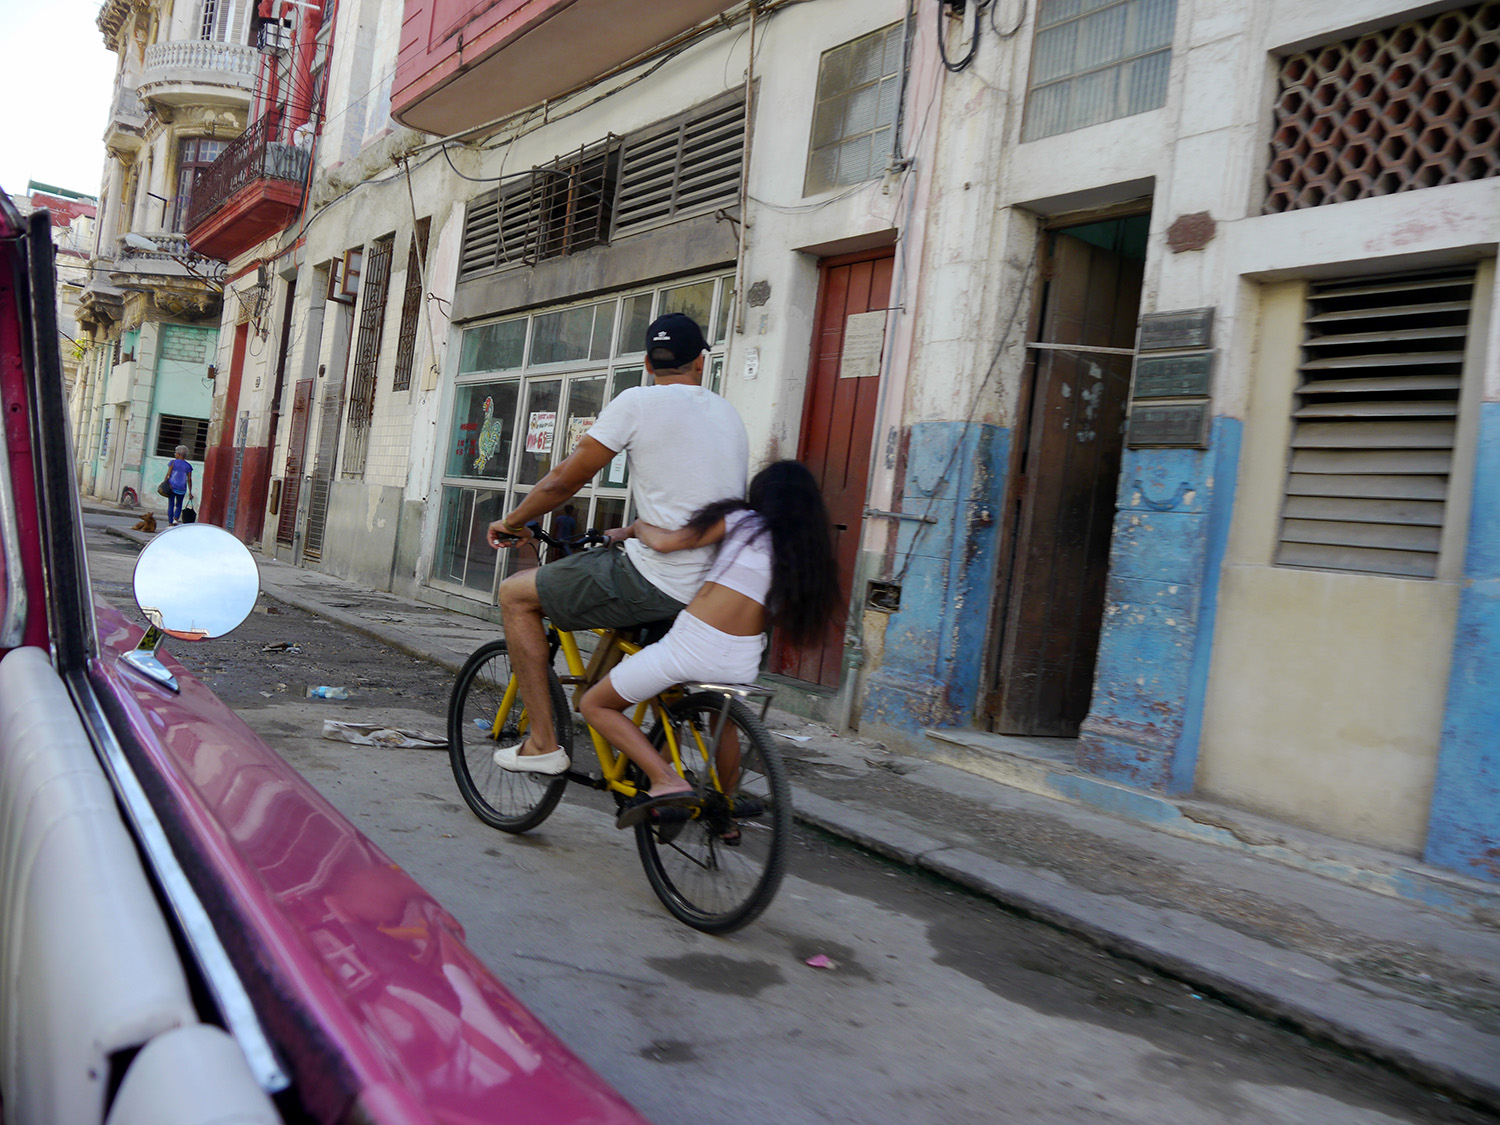 A girl holds on tight to a man on the back of a moving bicycle.